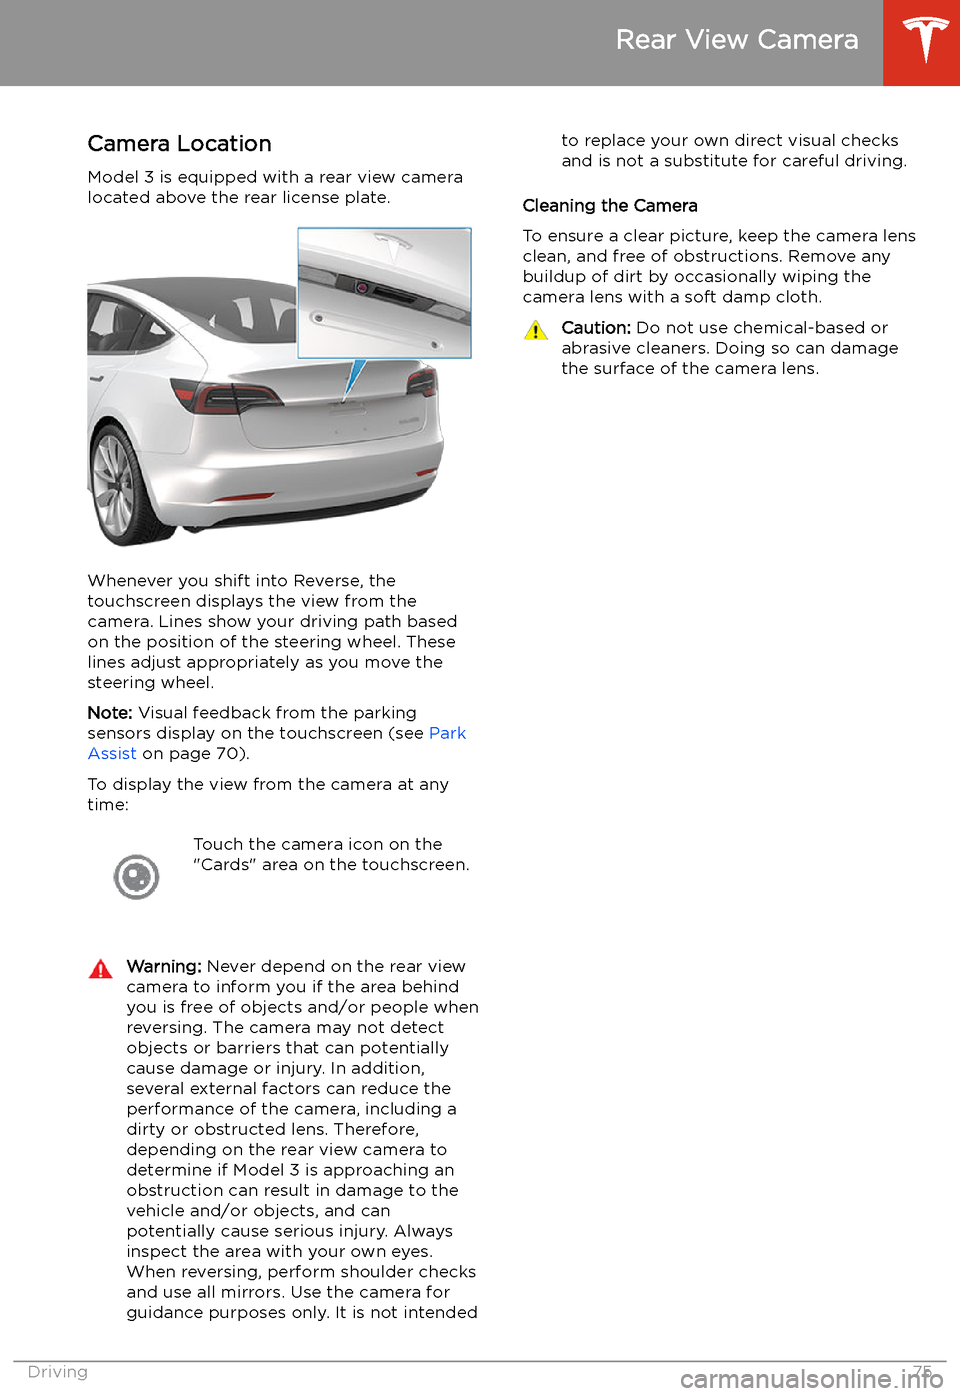 TESLA MODEL 3 2020  Owners Manuals Rear View Camera
Camera Location
Model 3 is equipped with a rear view camera
located above the rear license plate.
Whenever you shift into Reverse, the
touchscreen displays the view from the
camera. L